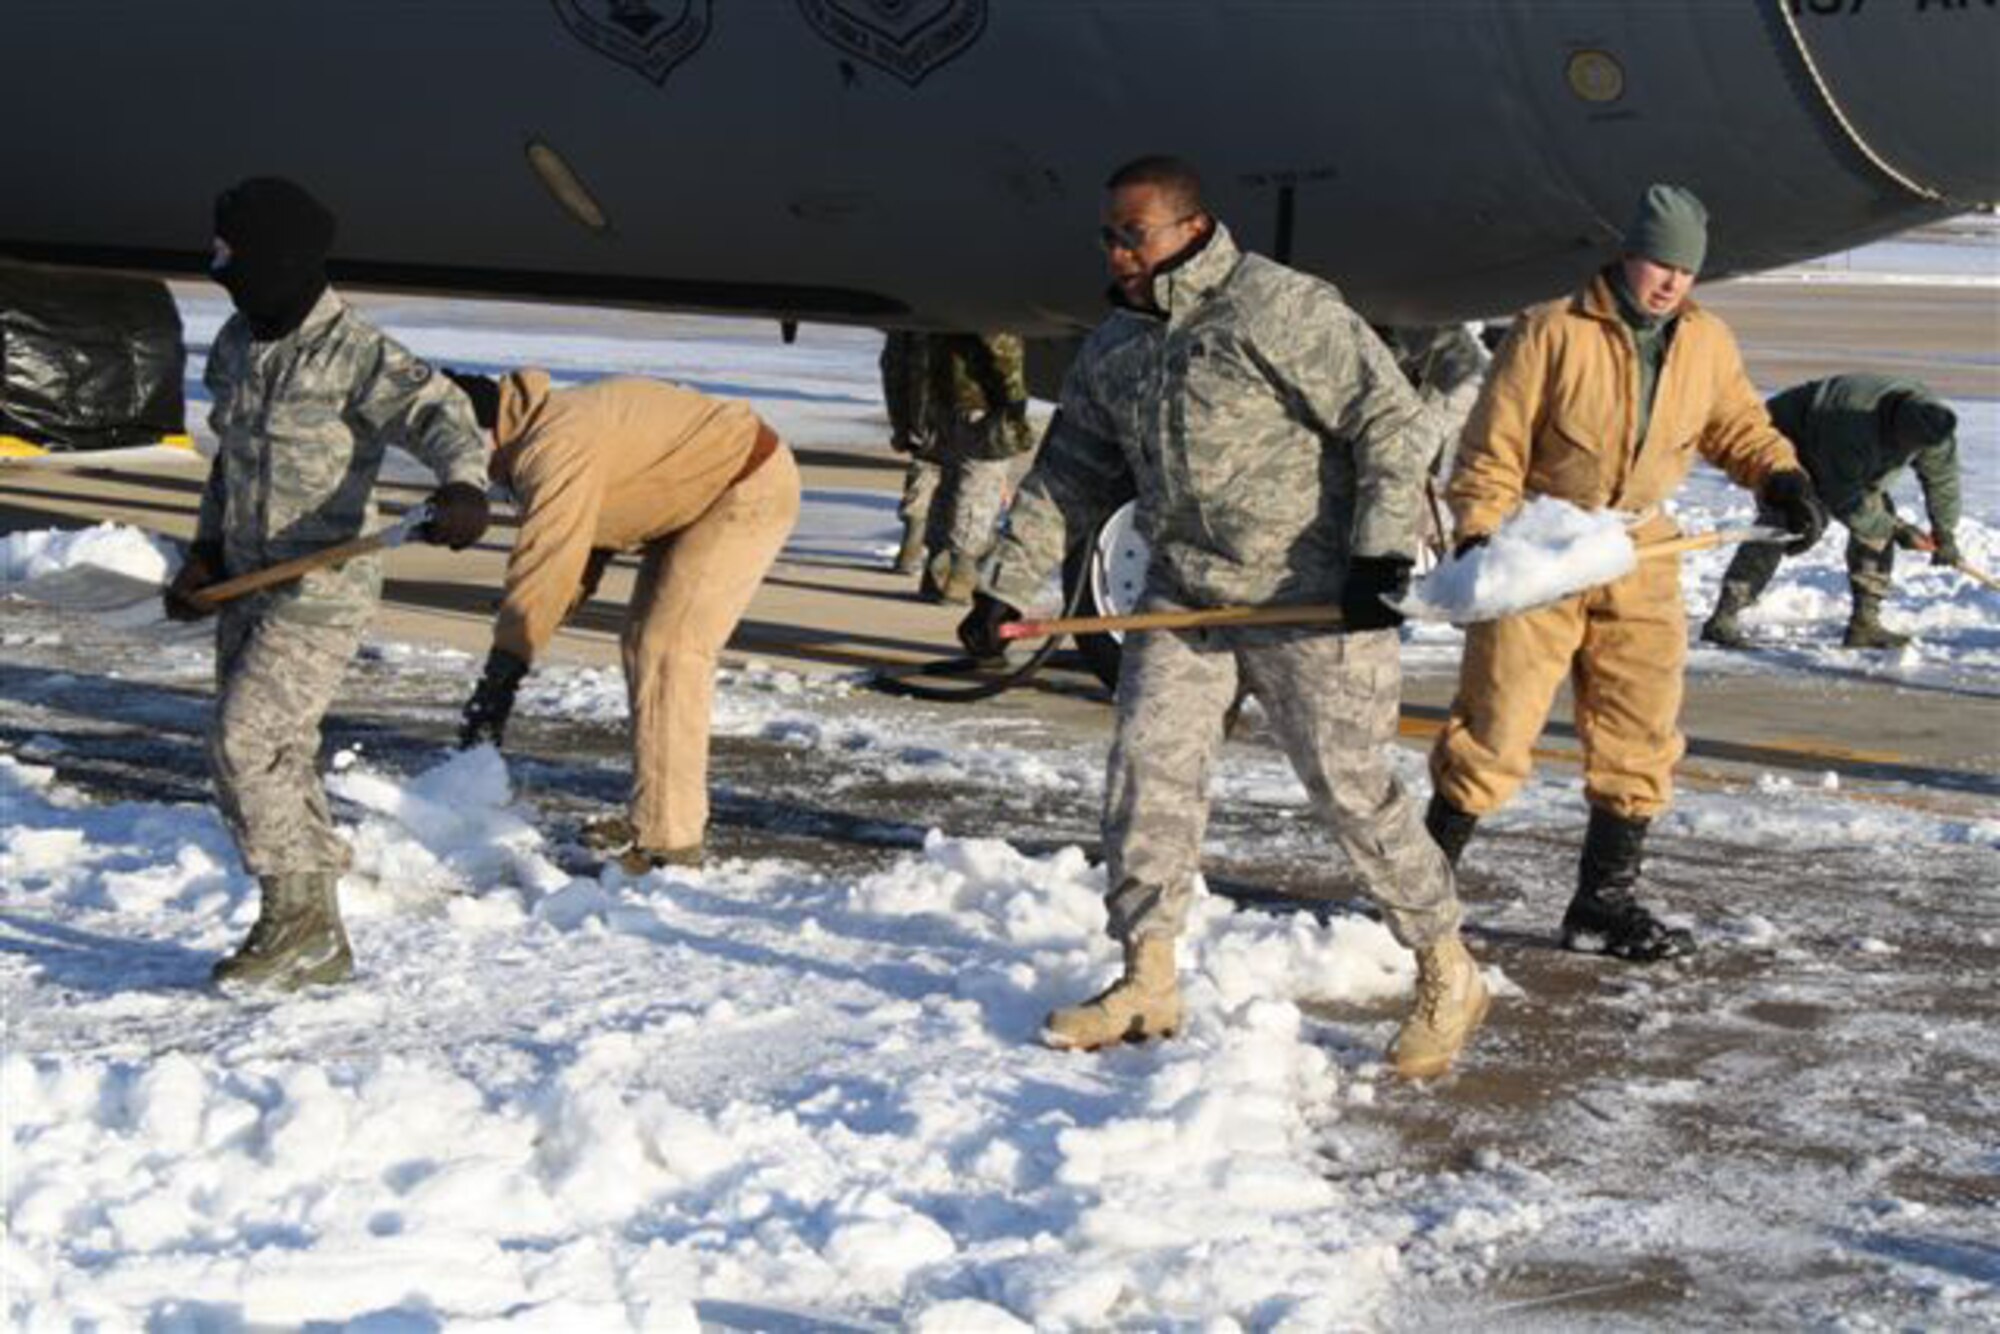 507th Air Refueling Wing Maintenance Crews were hard at work Dec. 26th following a Christmas snowstorm. Crews removed snow from under and around the Wing's KC-135s, allowing the aircraft to be moved. Their efforts enabled all aircraft to remain mission ready, just in time for a Dec. 28th overseas deployment. 